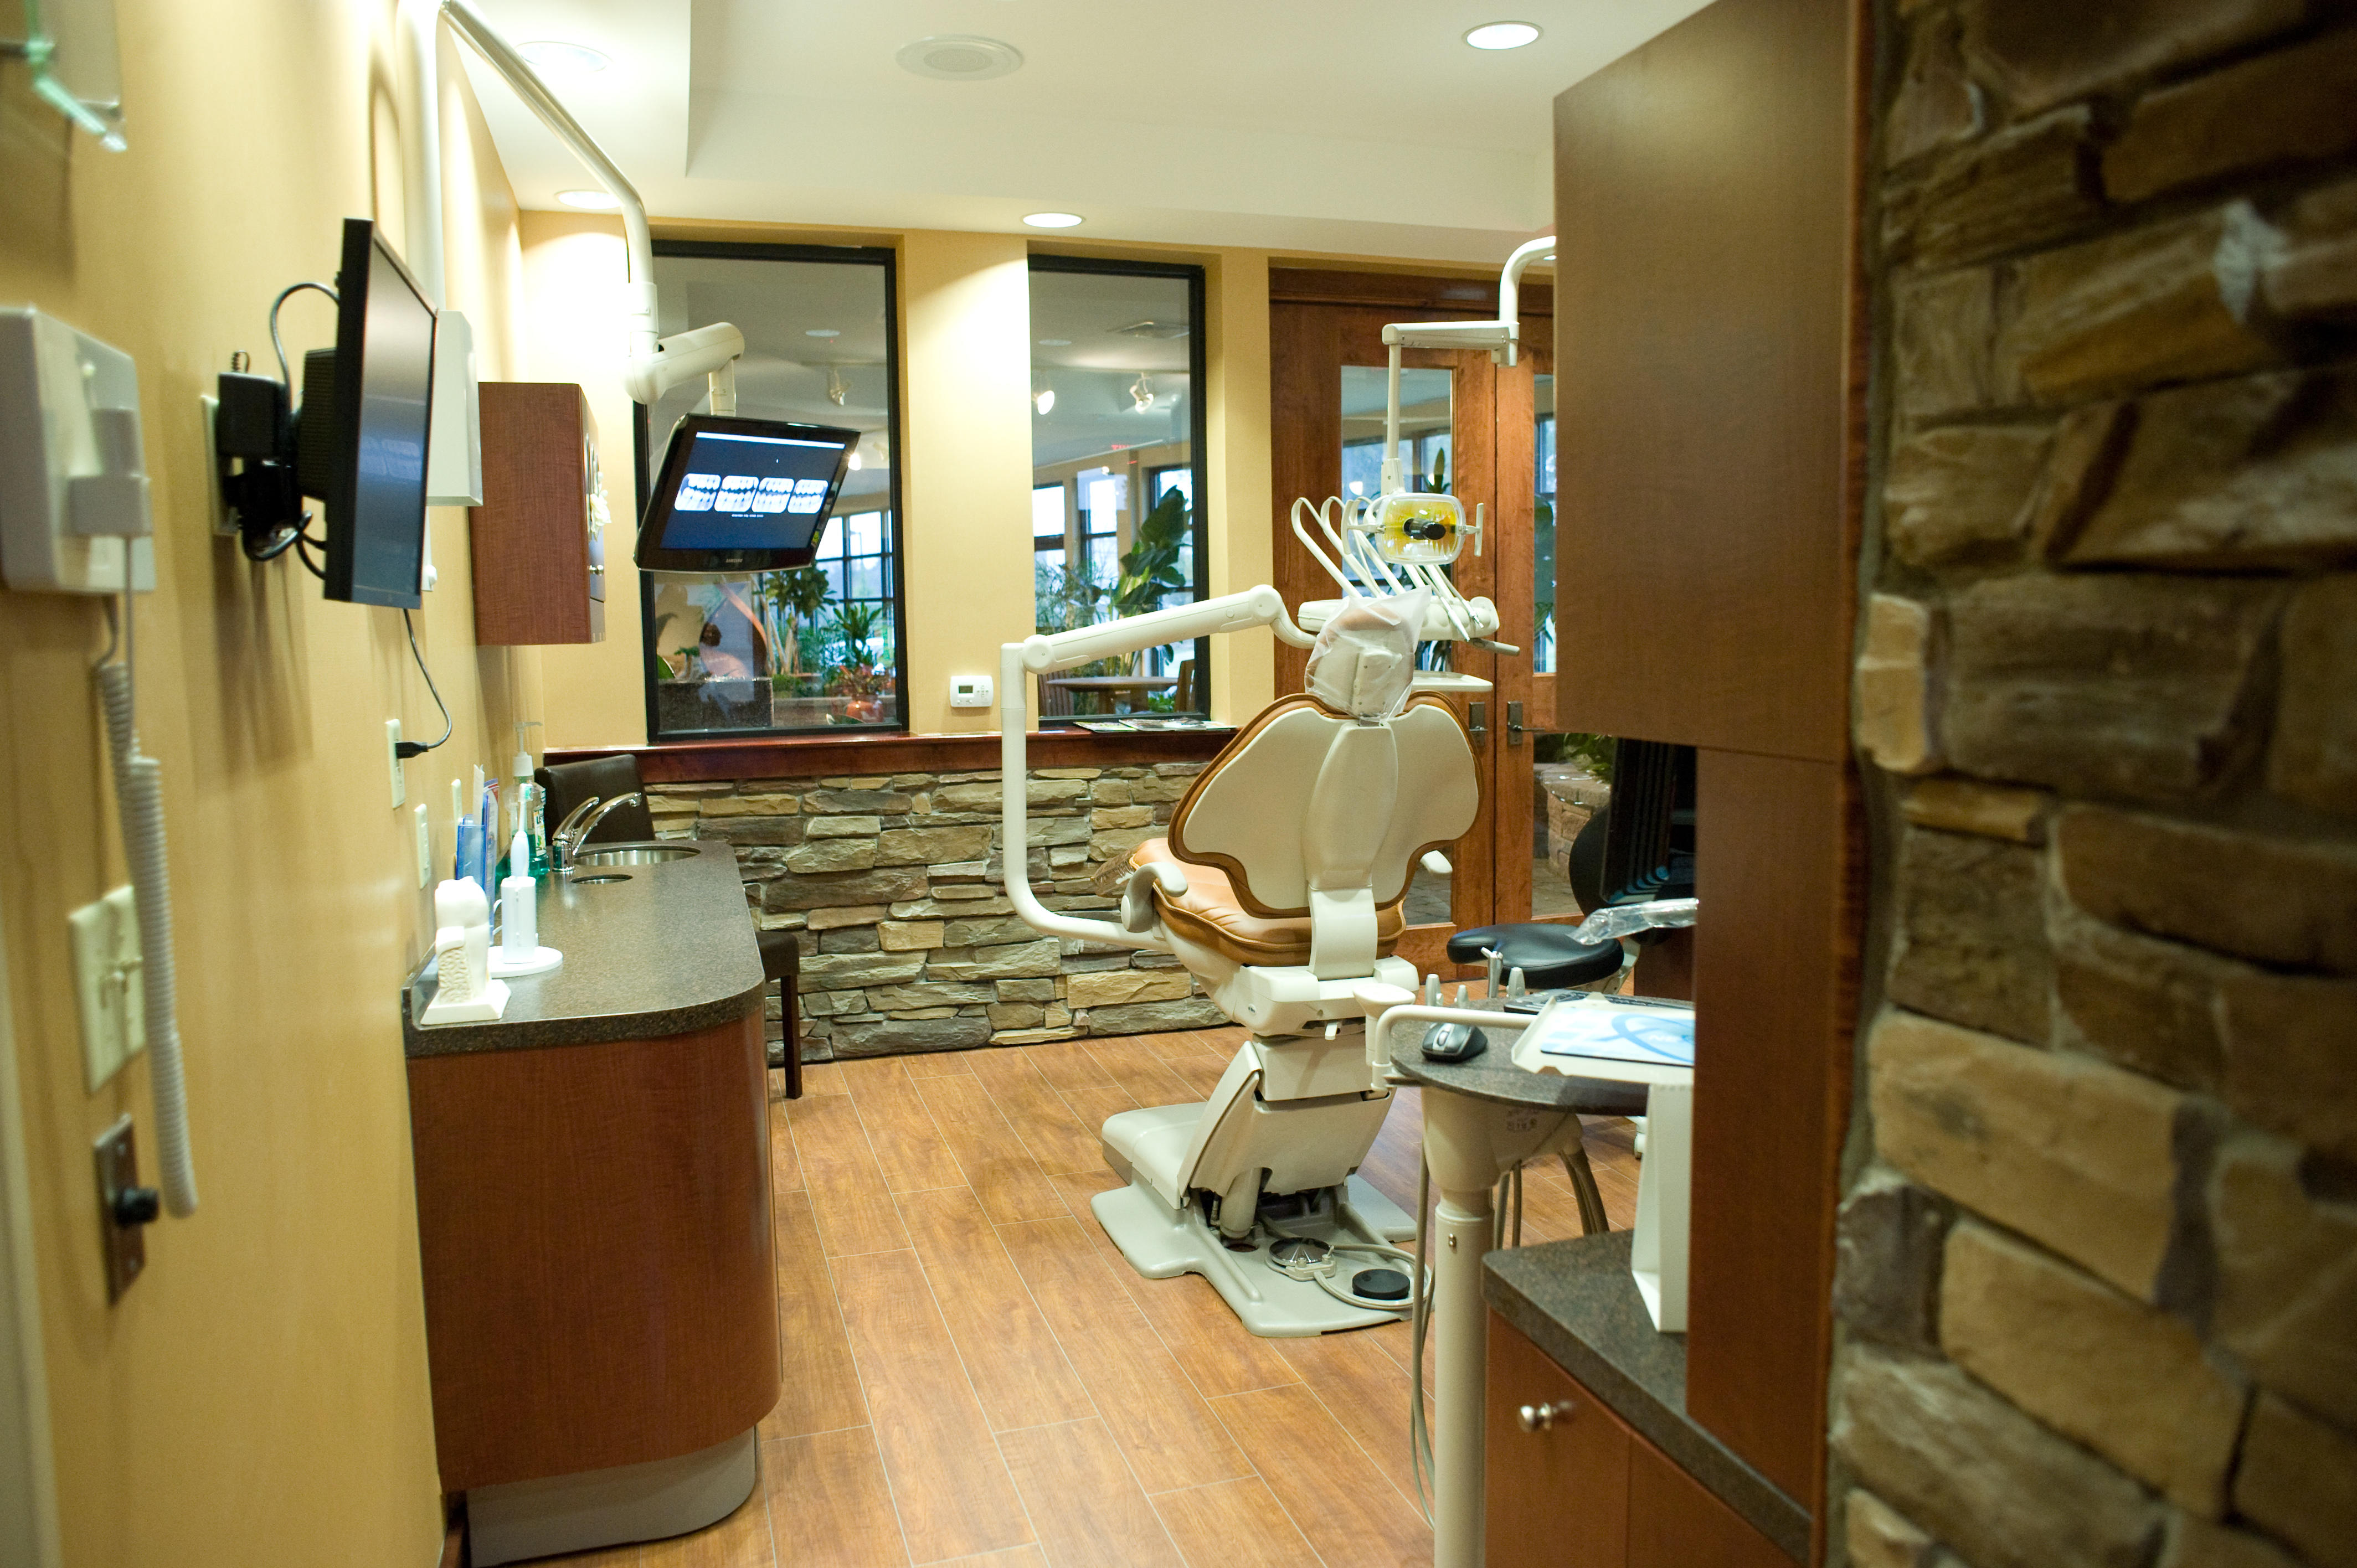 The Art of Dentistry and Spa Photo